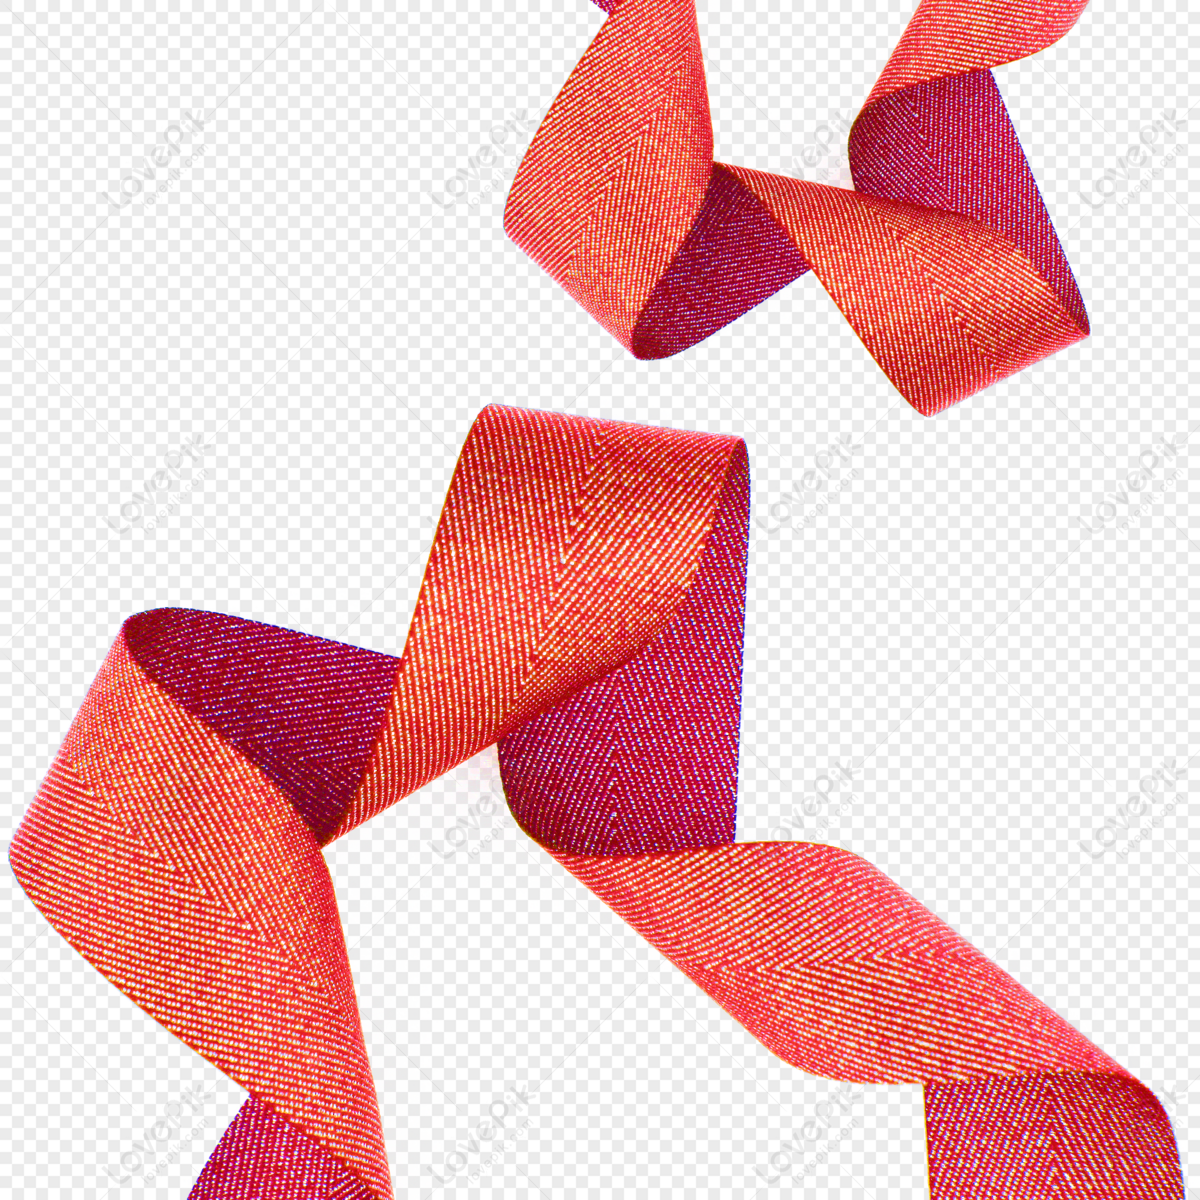 Ribbons PNG Images, Download 290000+ Ribbons PNG Resources with